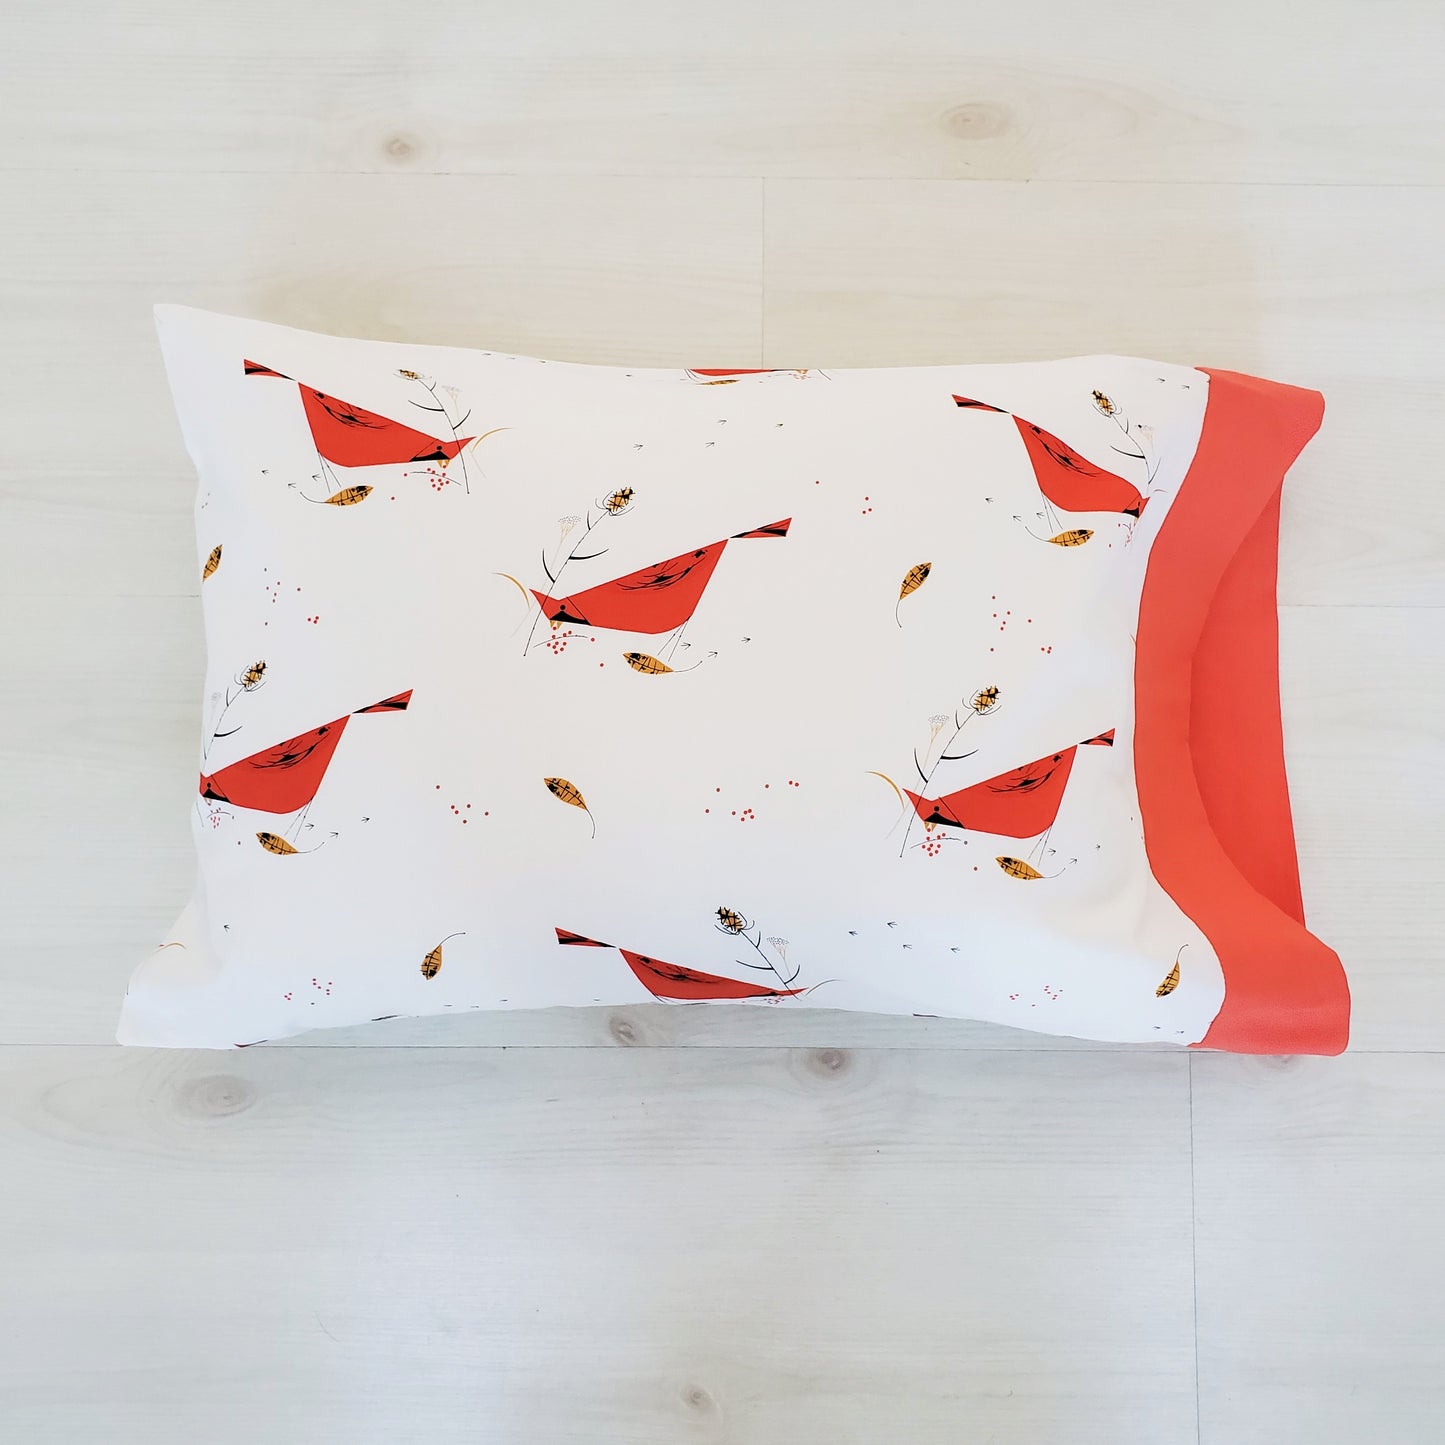 Organic Cotton Toddler Pillowcase in Charley Harper Holiday Prints